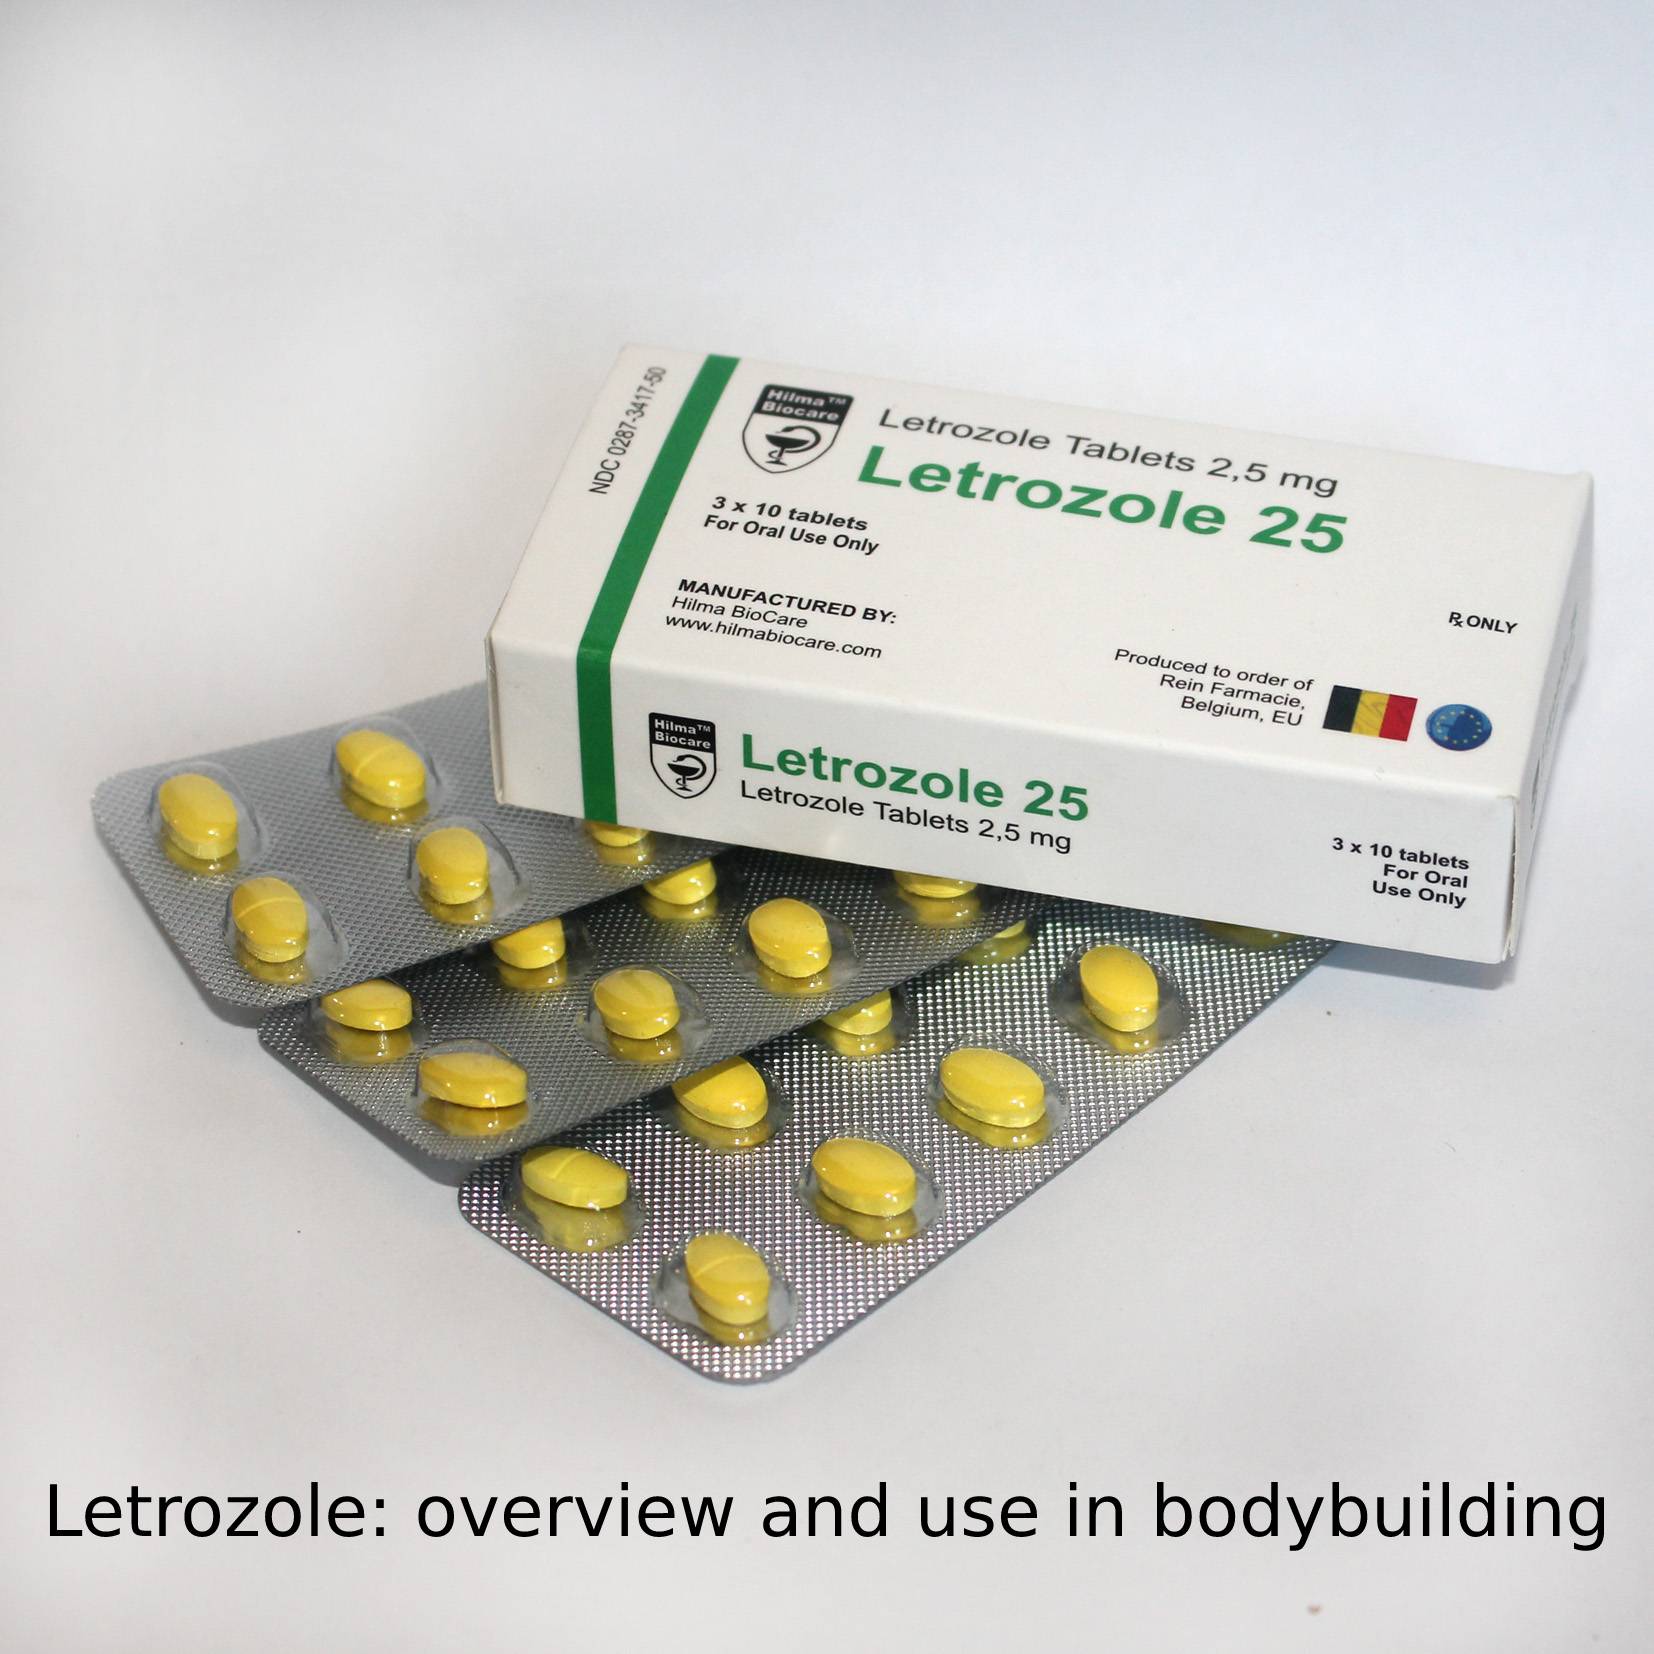 Letrozole: overview and use in bodybuilding